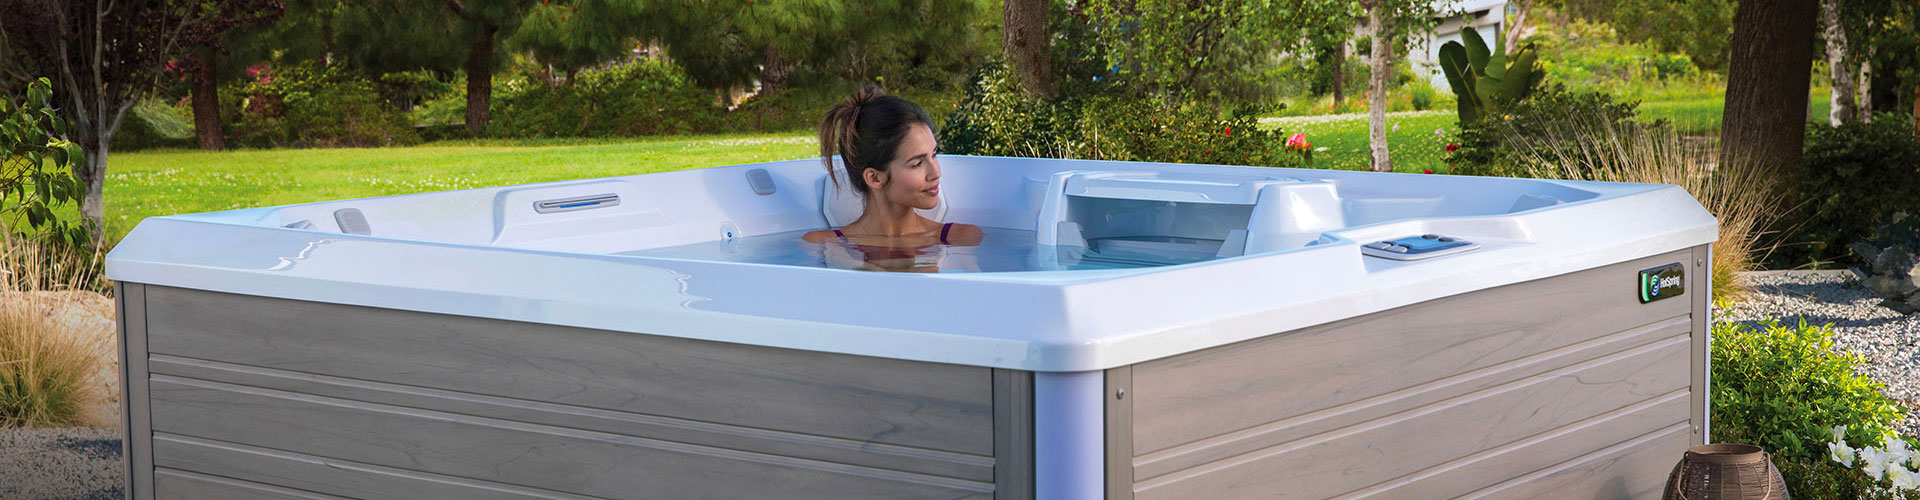 How to Choose a Hot Tub that’s Right for You